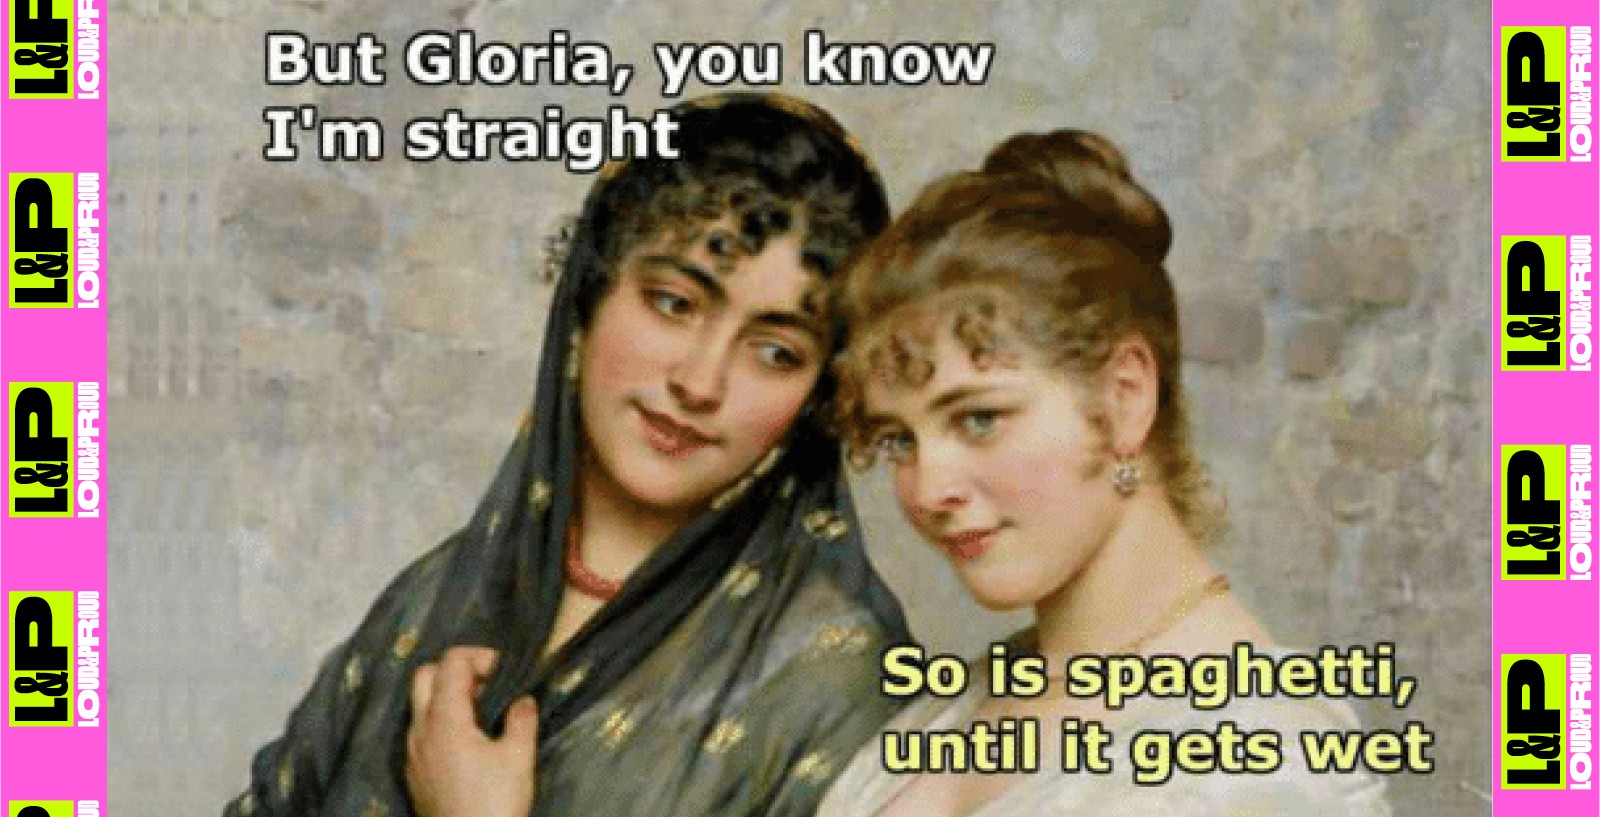 "But Gloria, you know I'm straight..."